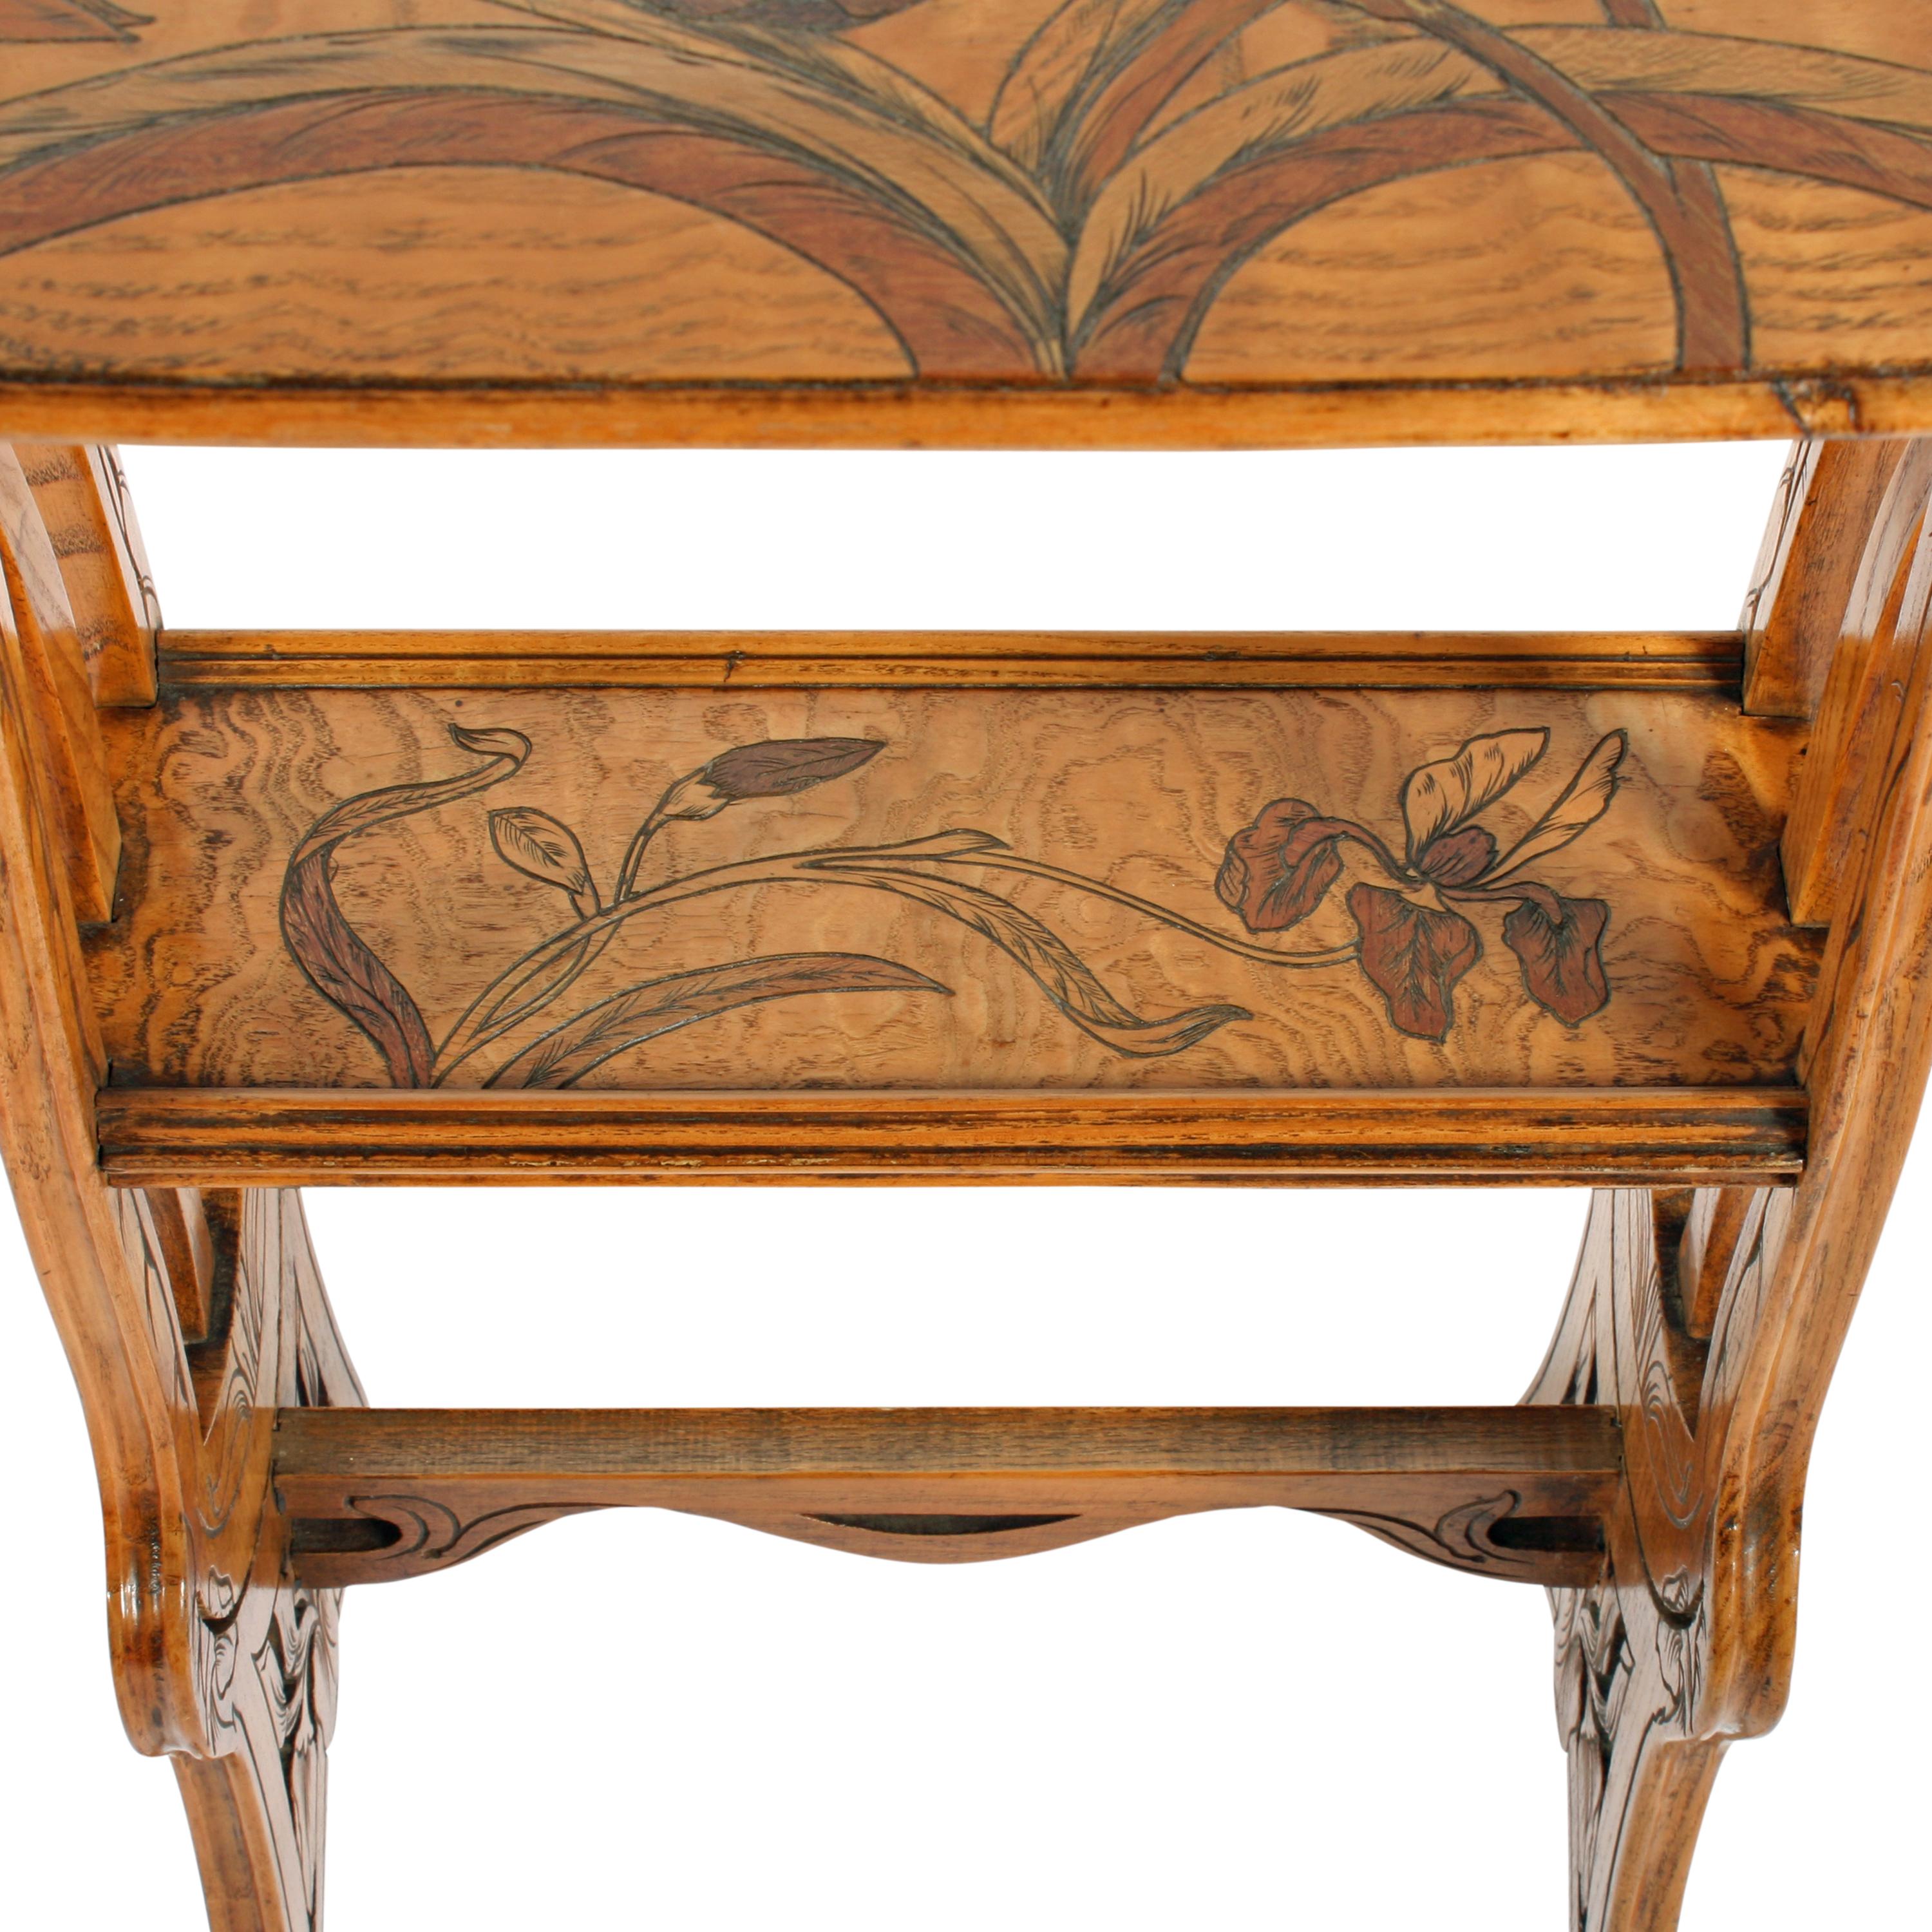 19th Century Marquetry Inlaid Ash Table Attributed to Émile Gallé